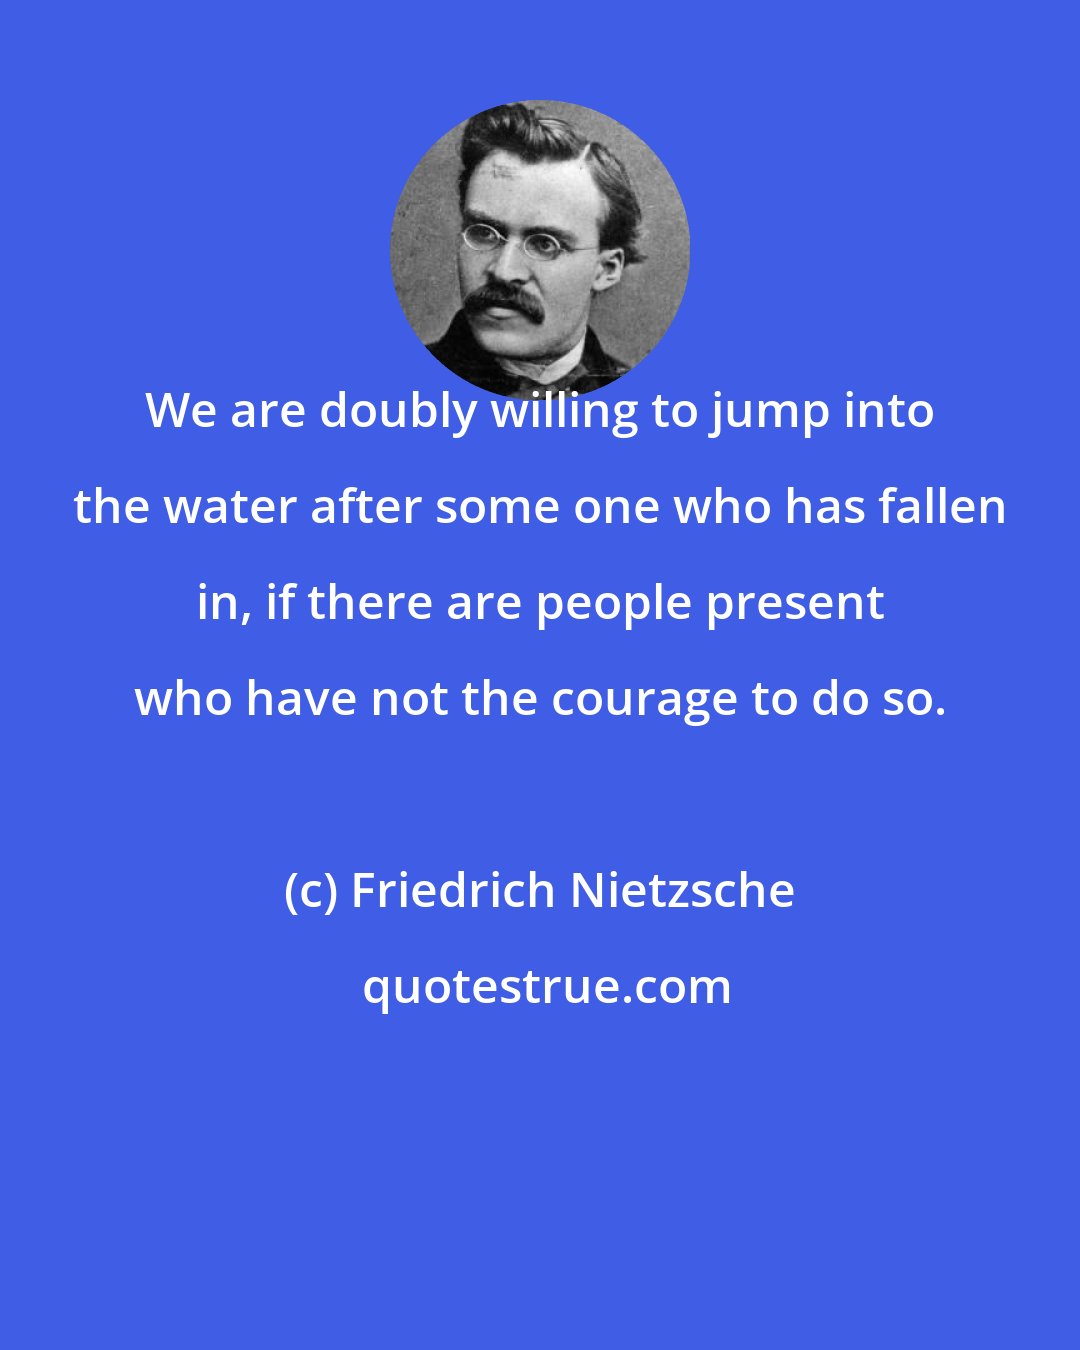 Friedrich Nietzsche: We are doubly willing to jump into the water after some one who has fallen in, if there are people present who have not the courage to do so.